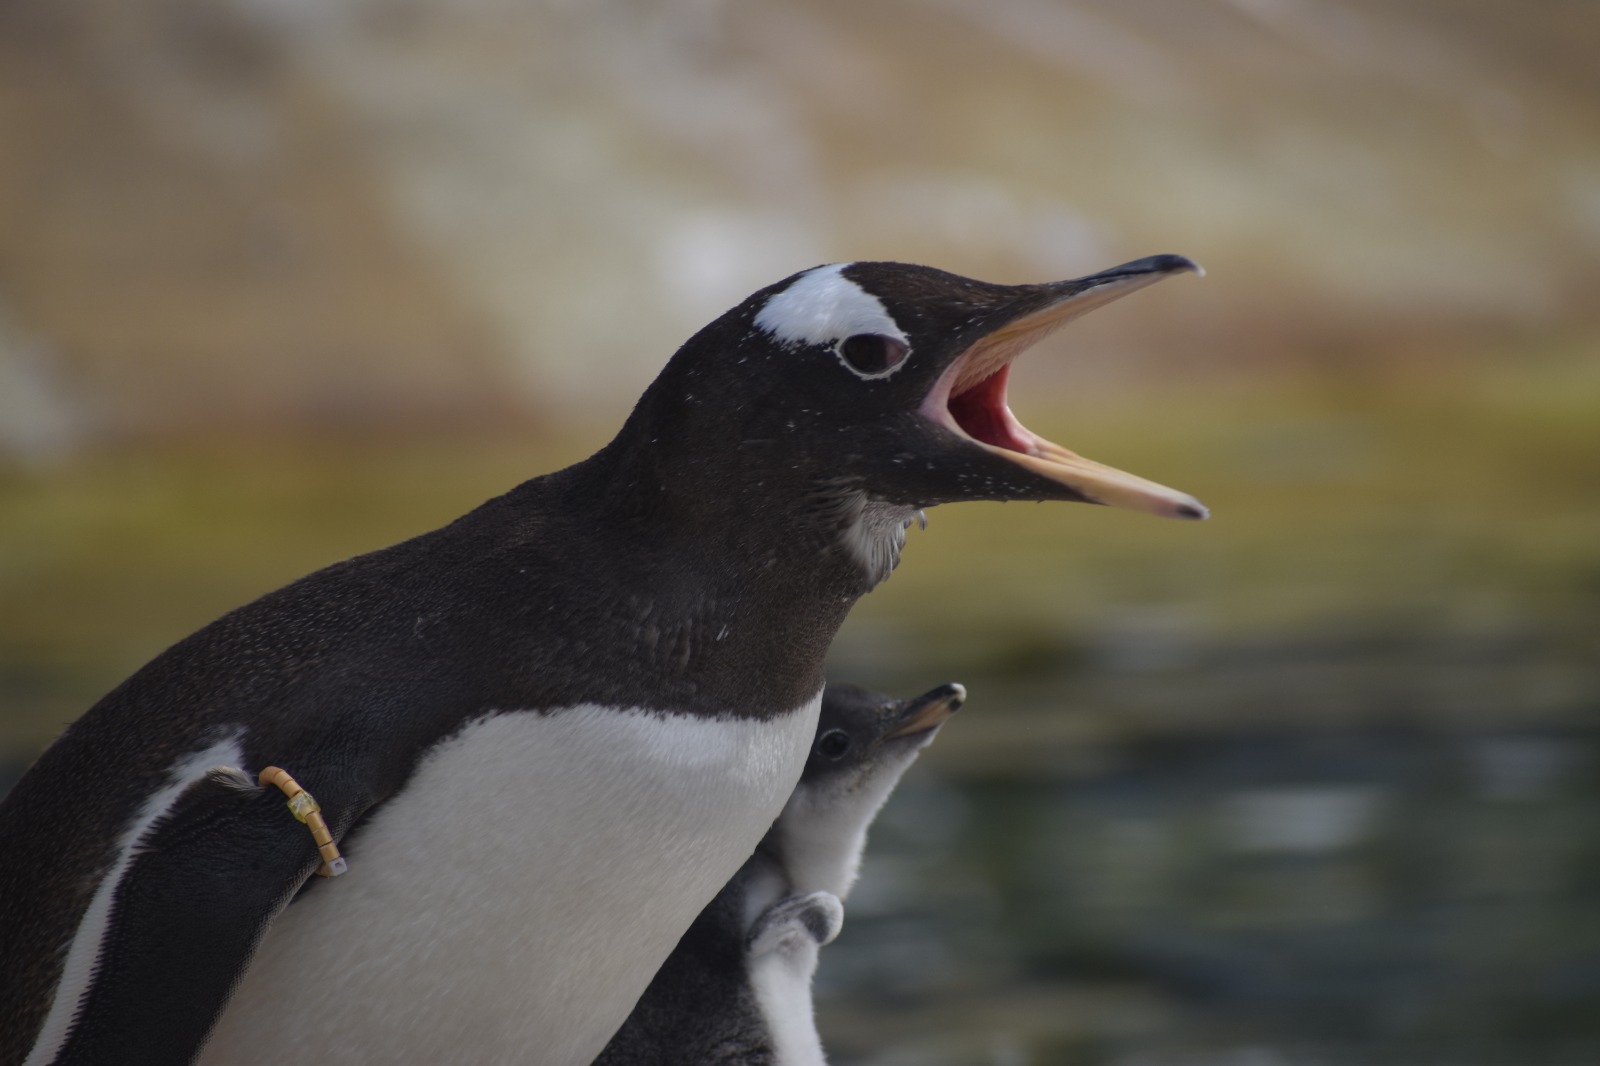 Kevin gentoo penguin shouting with beak open and chick 

IMAGE: Amy Middleton (2023)